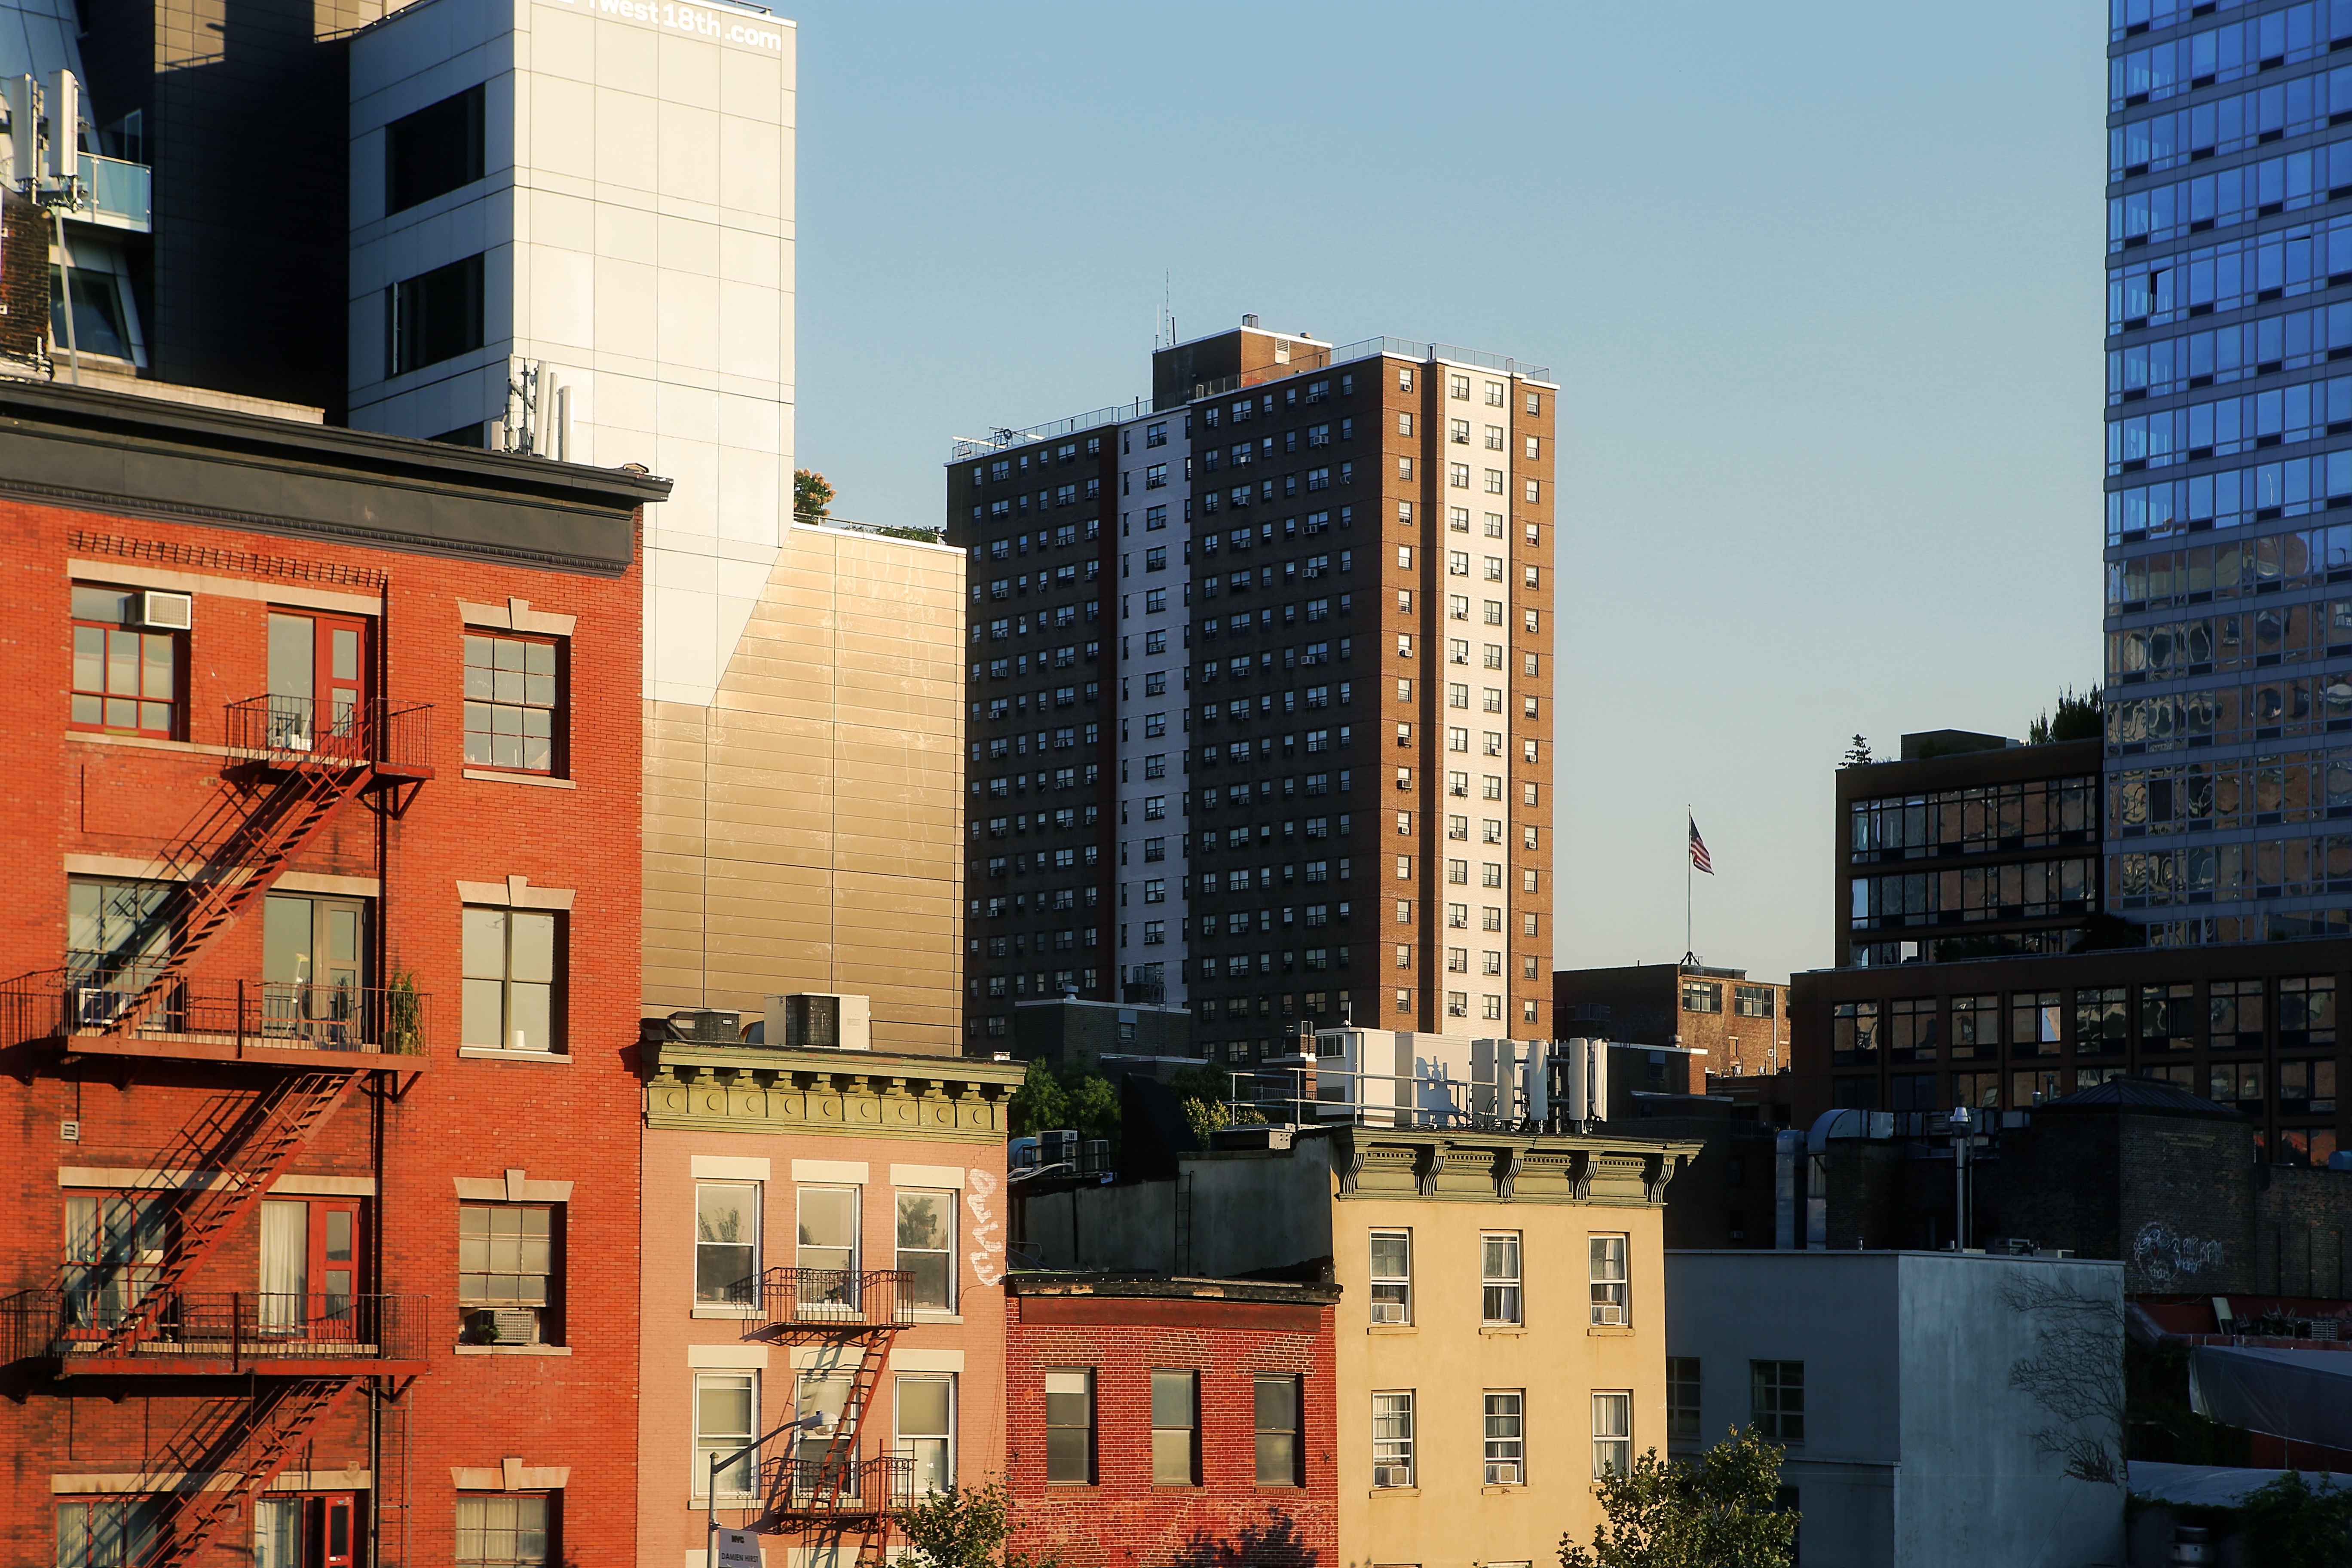 A brown public housing building rises among different residential buildings in New York City.